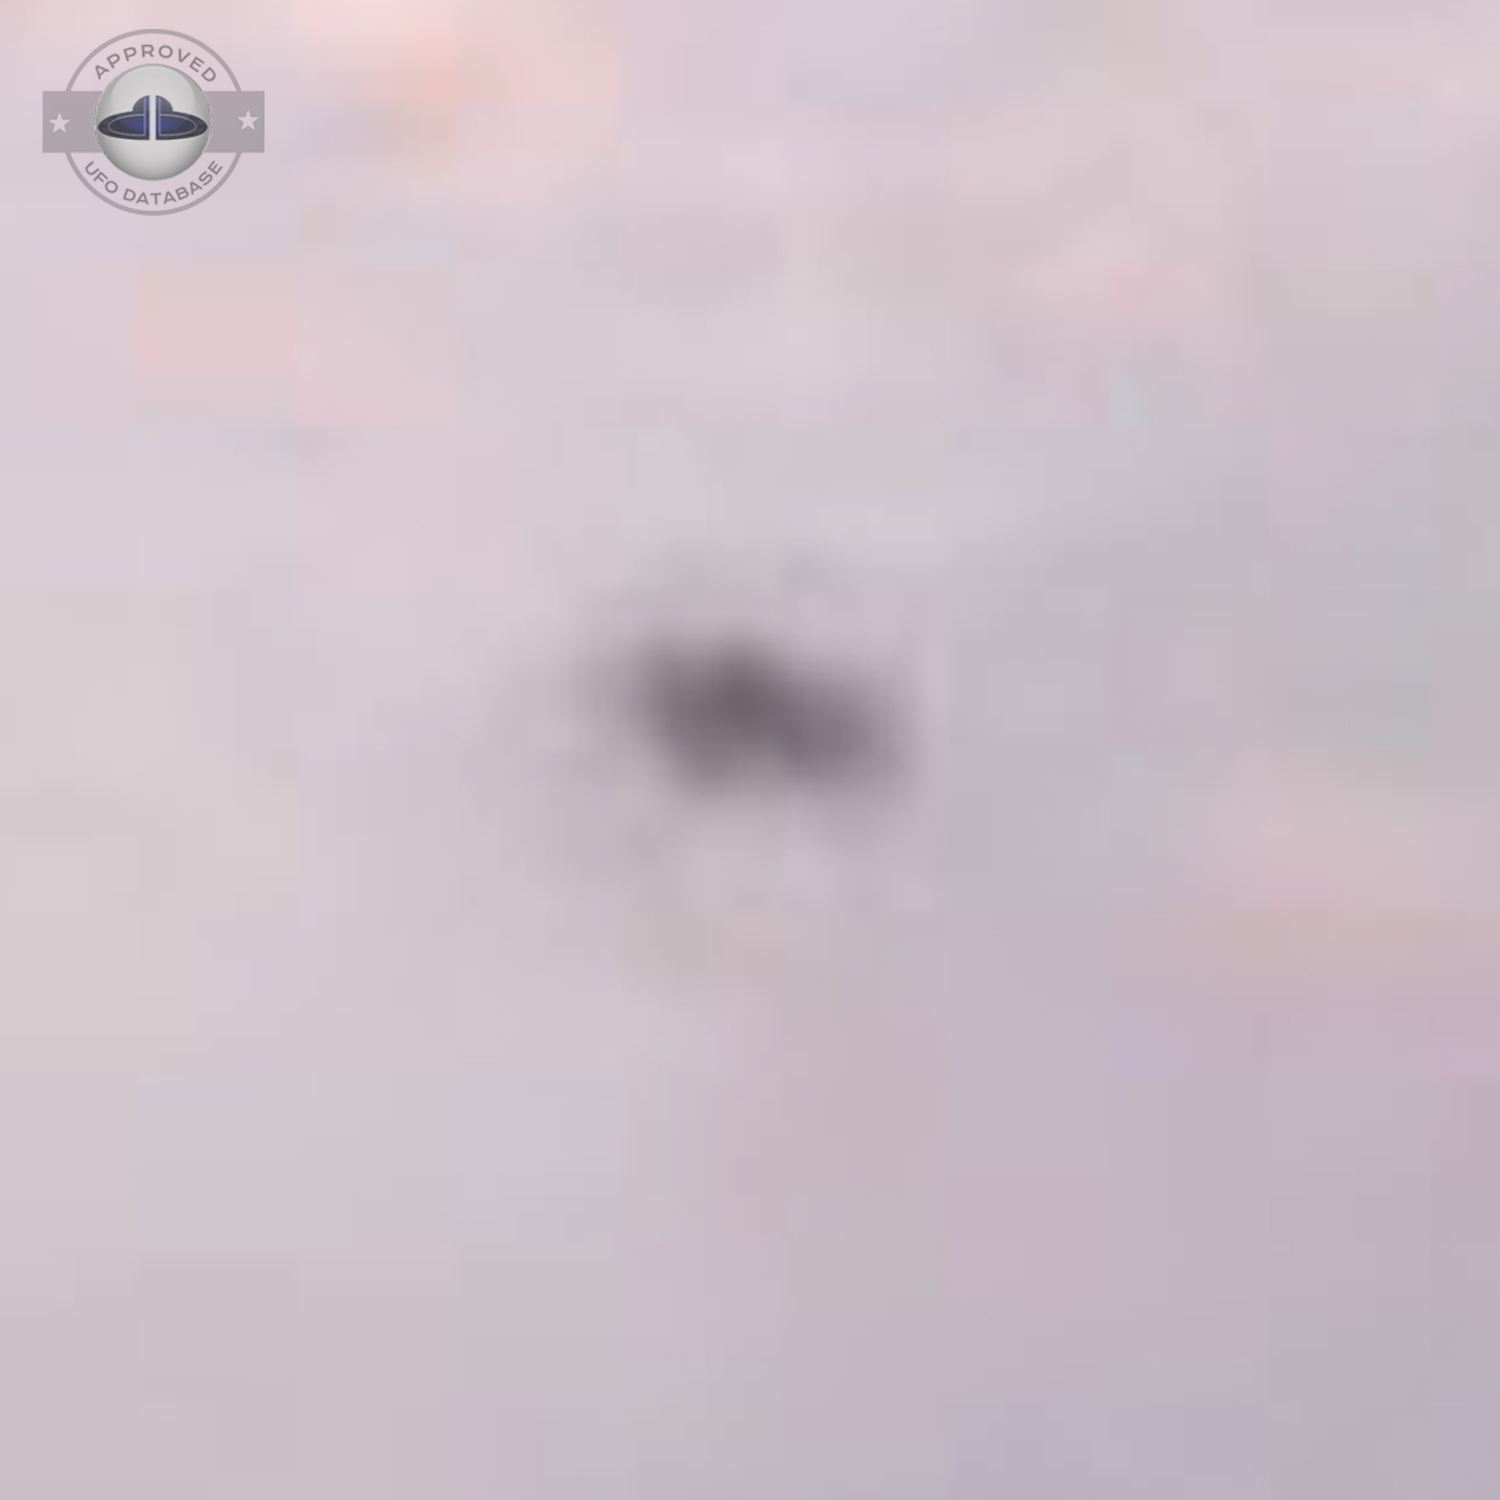 UFO flying over pasture with lama and horse in grey cloudy sky UFO Picture #19-4